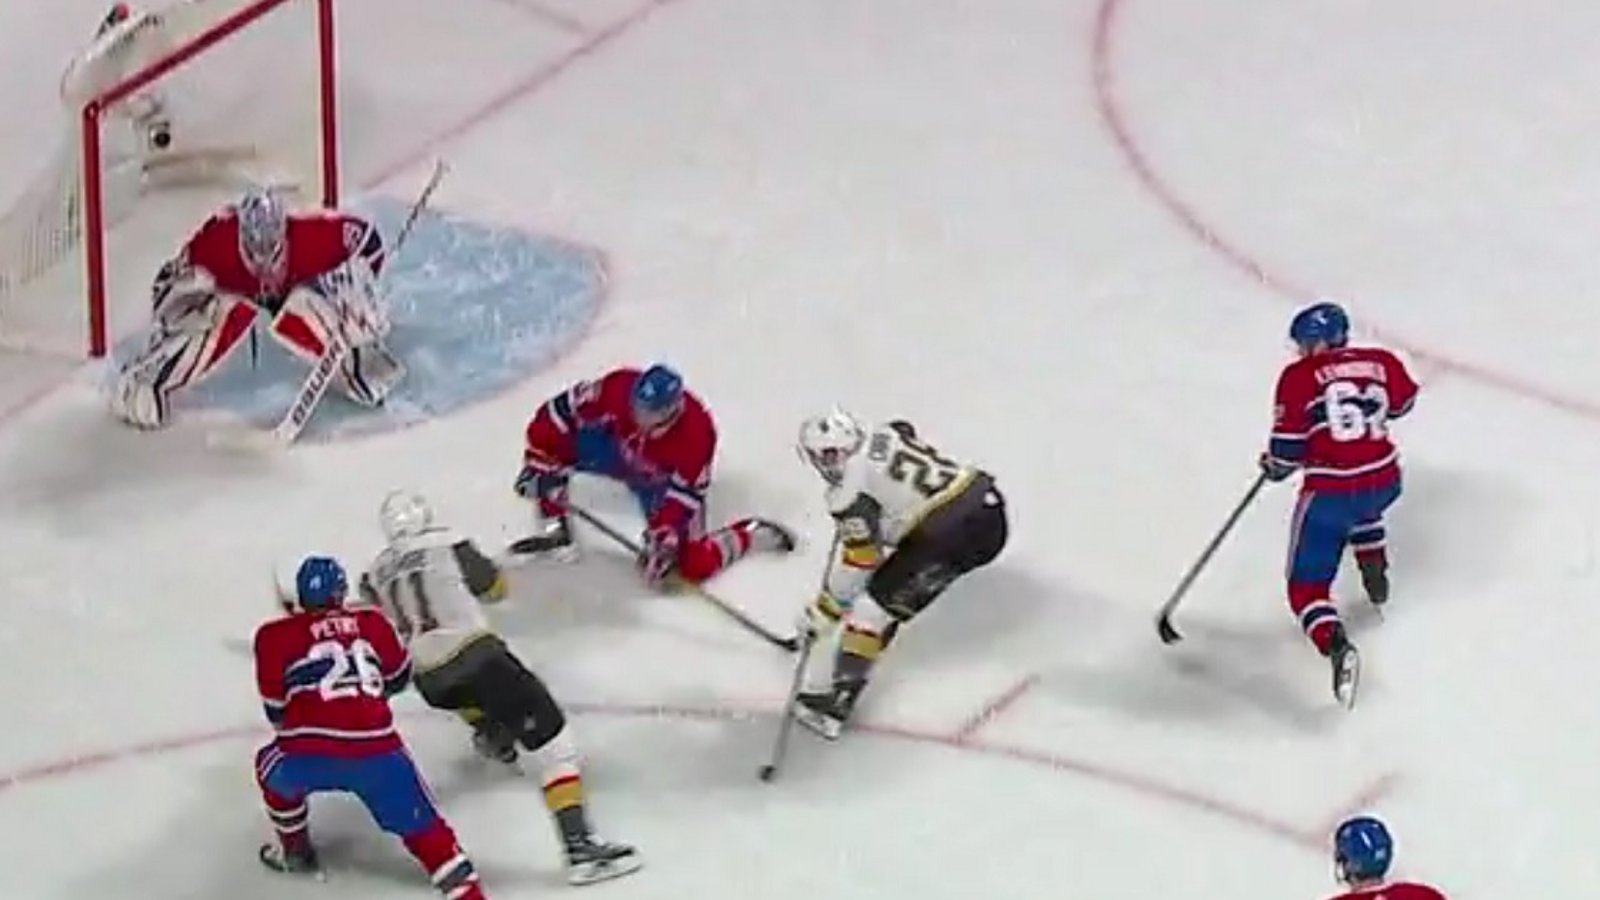 Pierre-Edouard Bellemare absolutely embarrasses the Canadiens. 